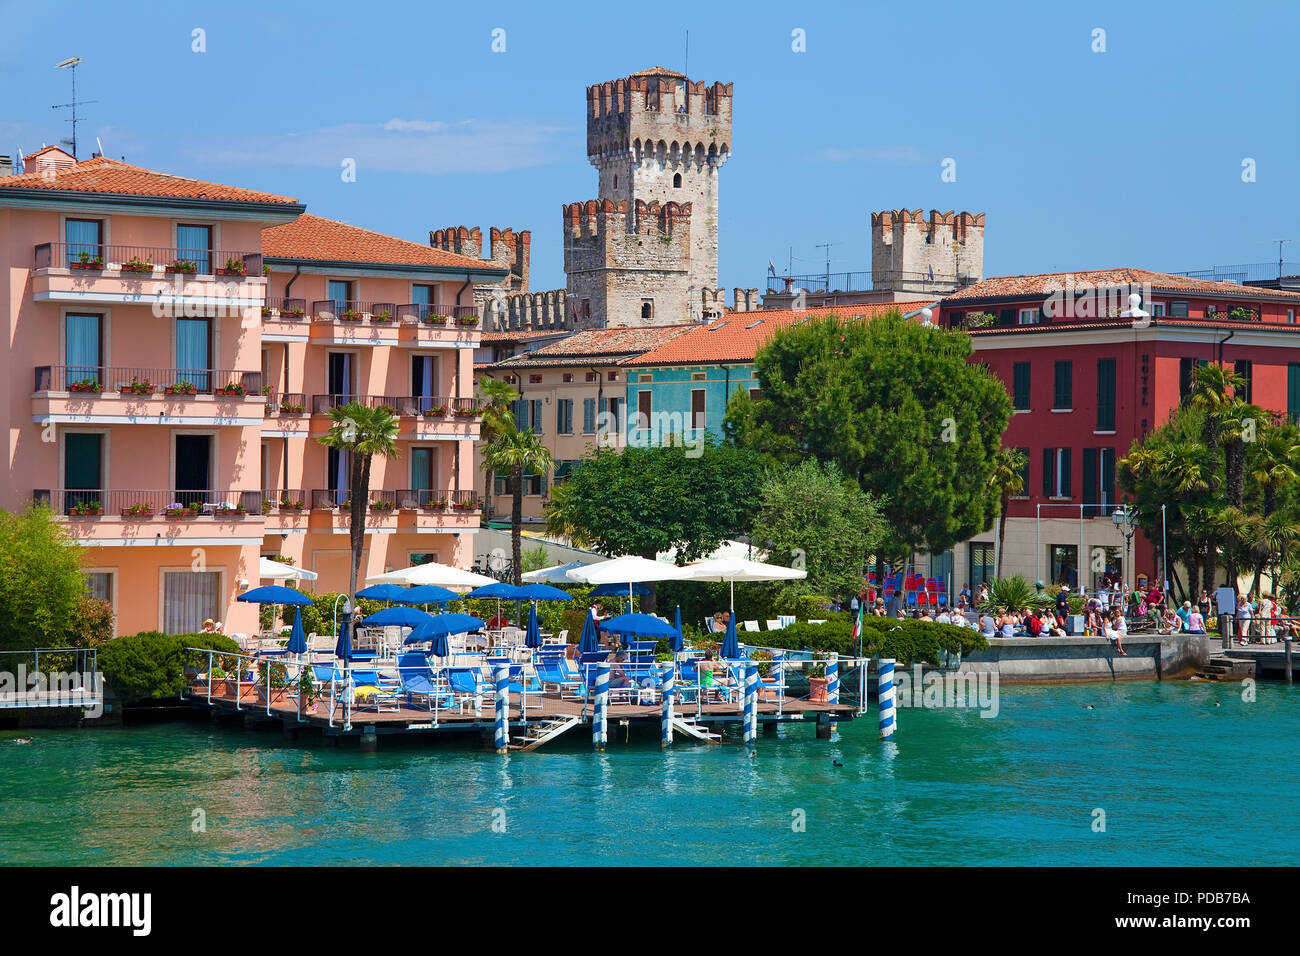 Restaurant on a dock at lakeside, Scaliger castle, landmark of Sirmione, Lake Garda, Lombardy, Italy Stock Photo